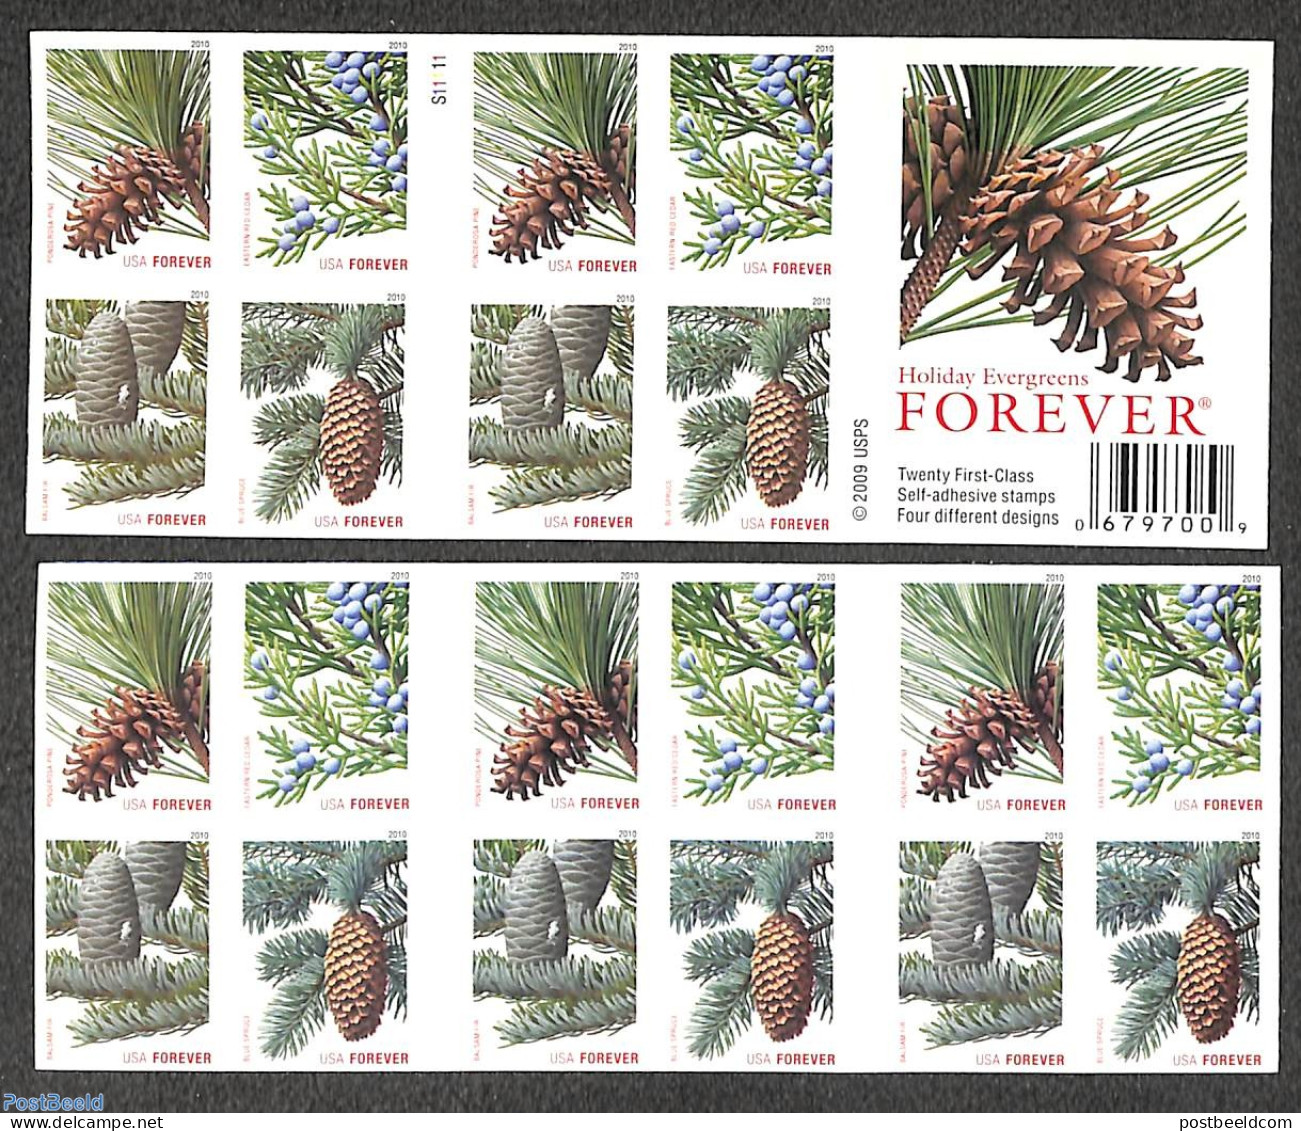 United States Of America 2010 Trees Booklet, Double Sided, Mint NH, Nature - Trees & Forests - Stamp Booklets - Ongebruikt